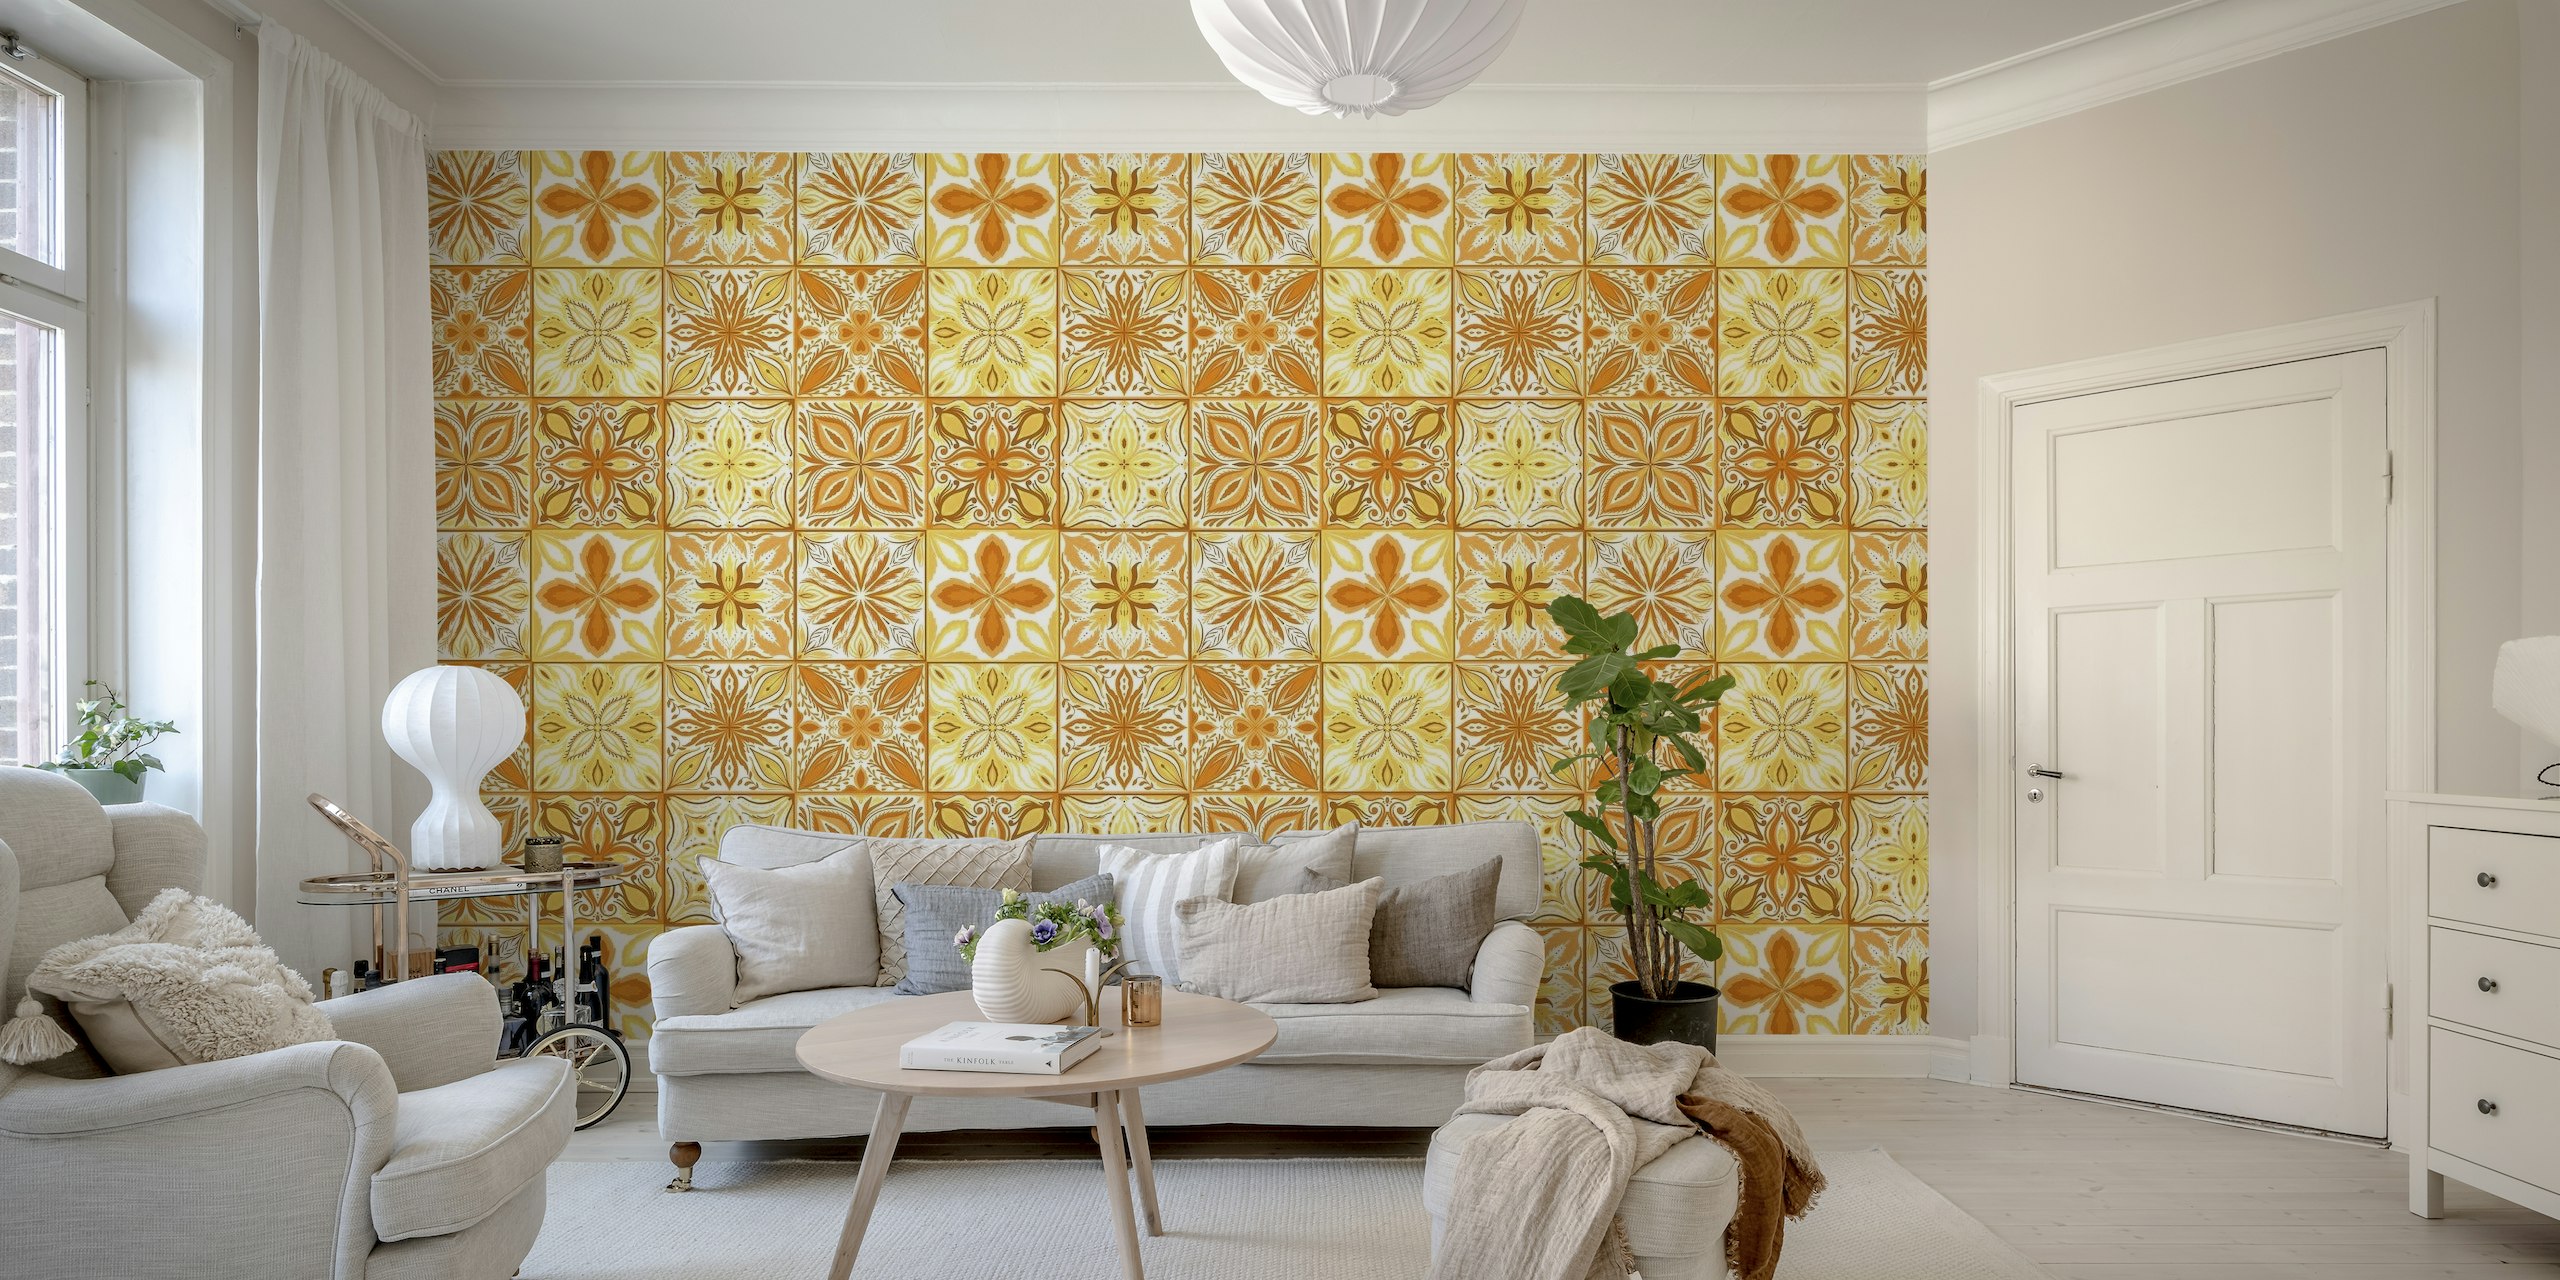 Ornate tiles in orange and yellow tapet